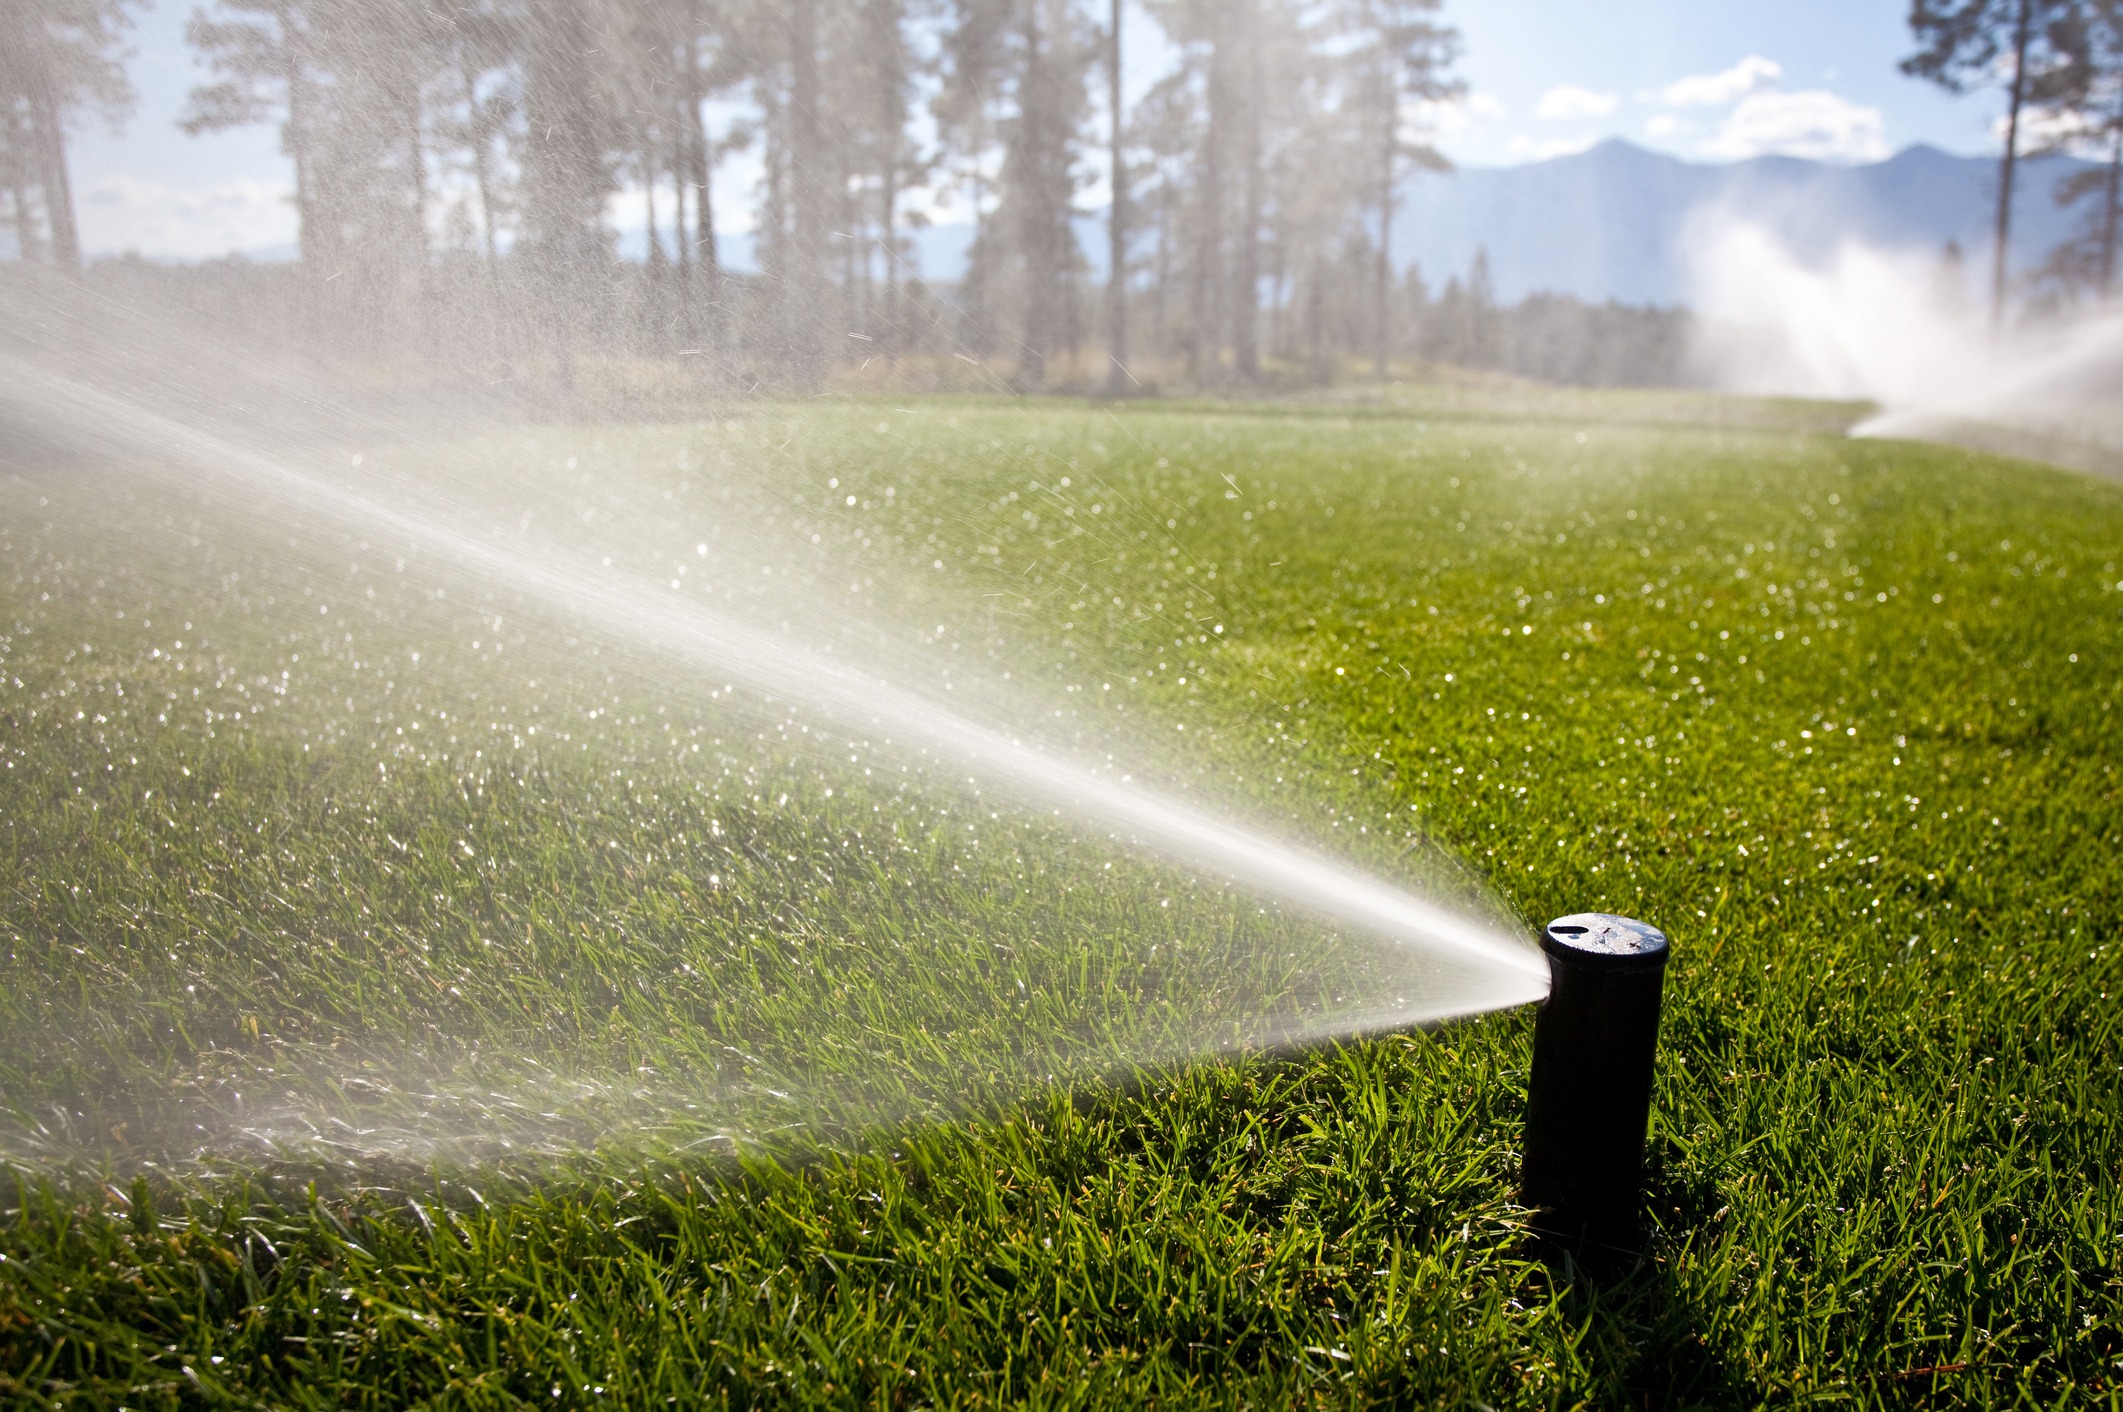 Sprinklers are actively watering a lush green lawn with fine mist against a backdrop of pine trees and distant mountains under a clear sky.